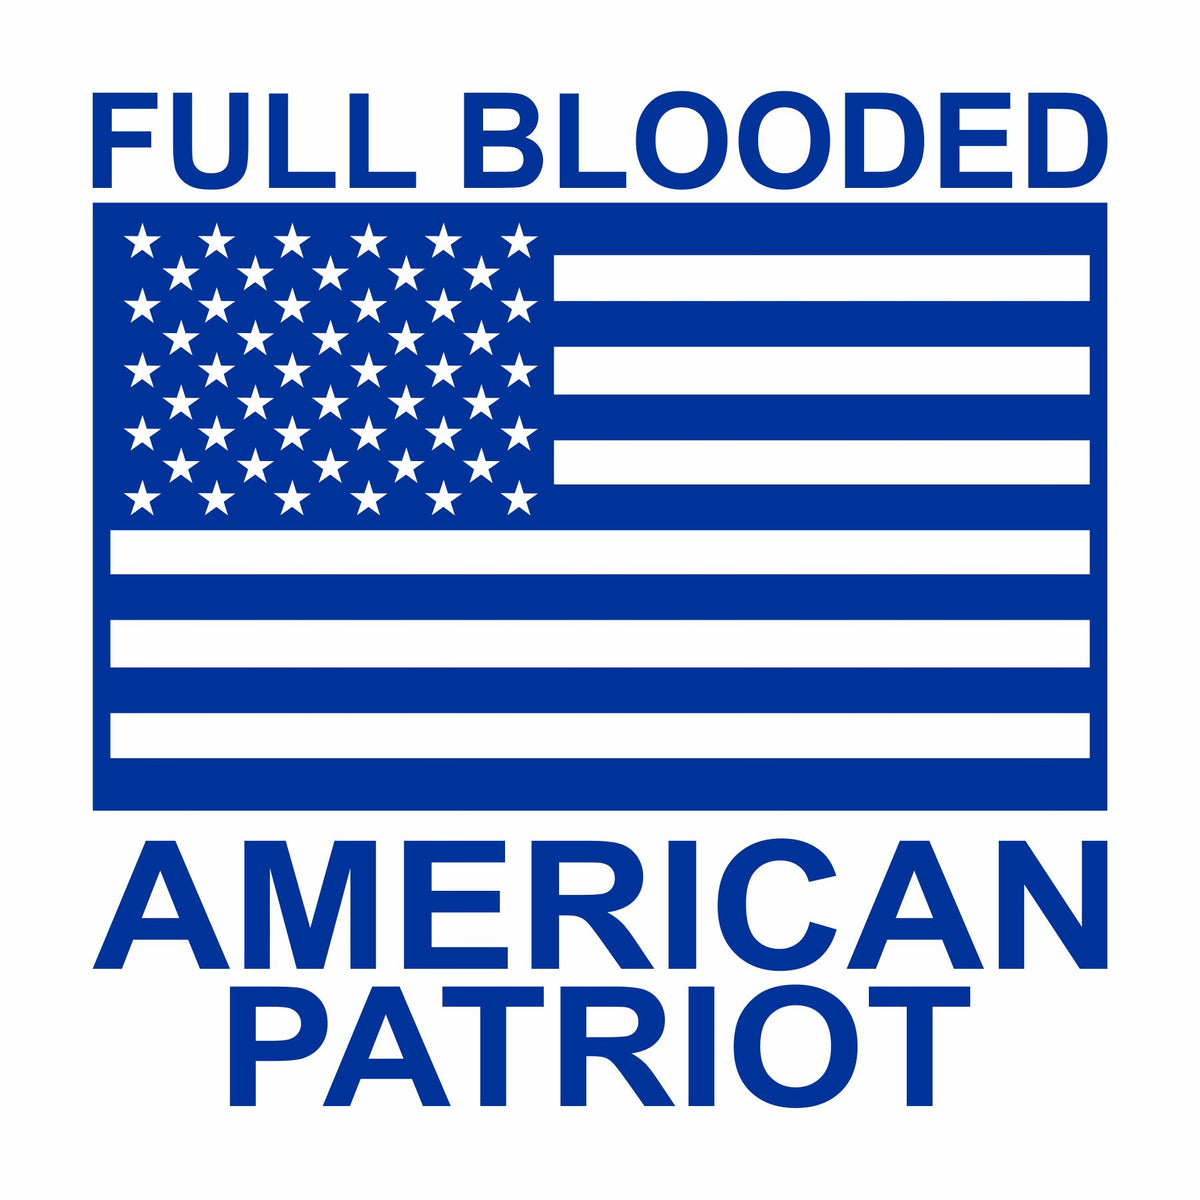 Full Blooded American Patriot - Vinyl Decal - Free Shipping